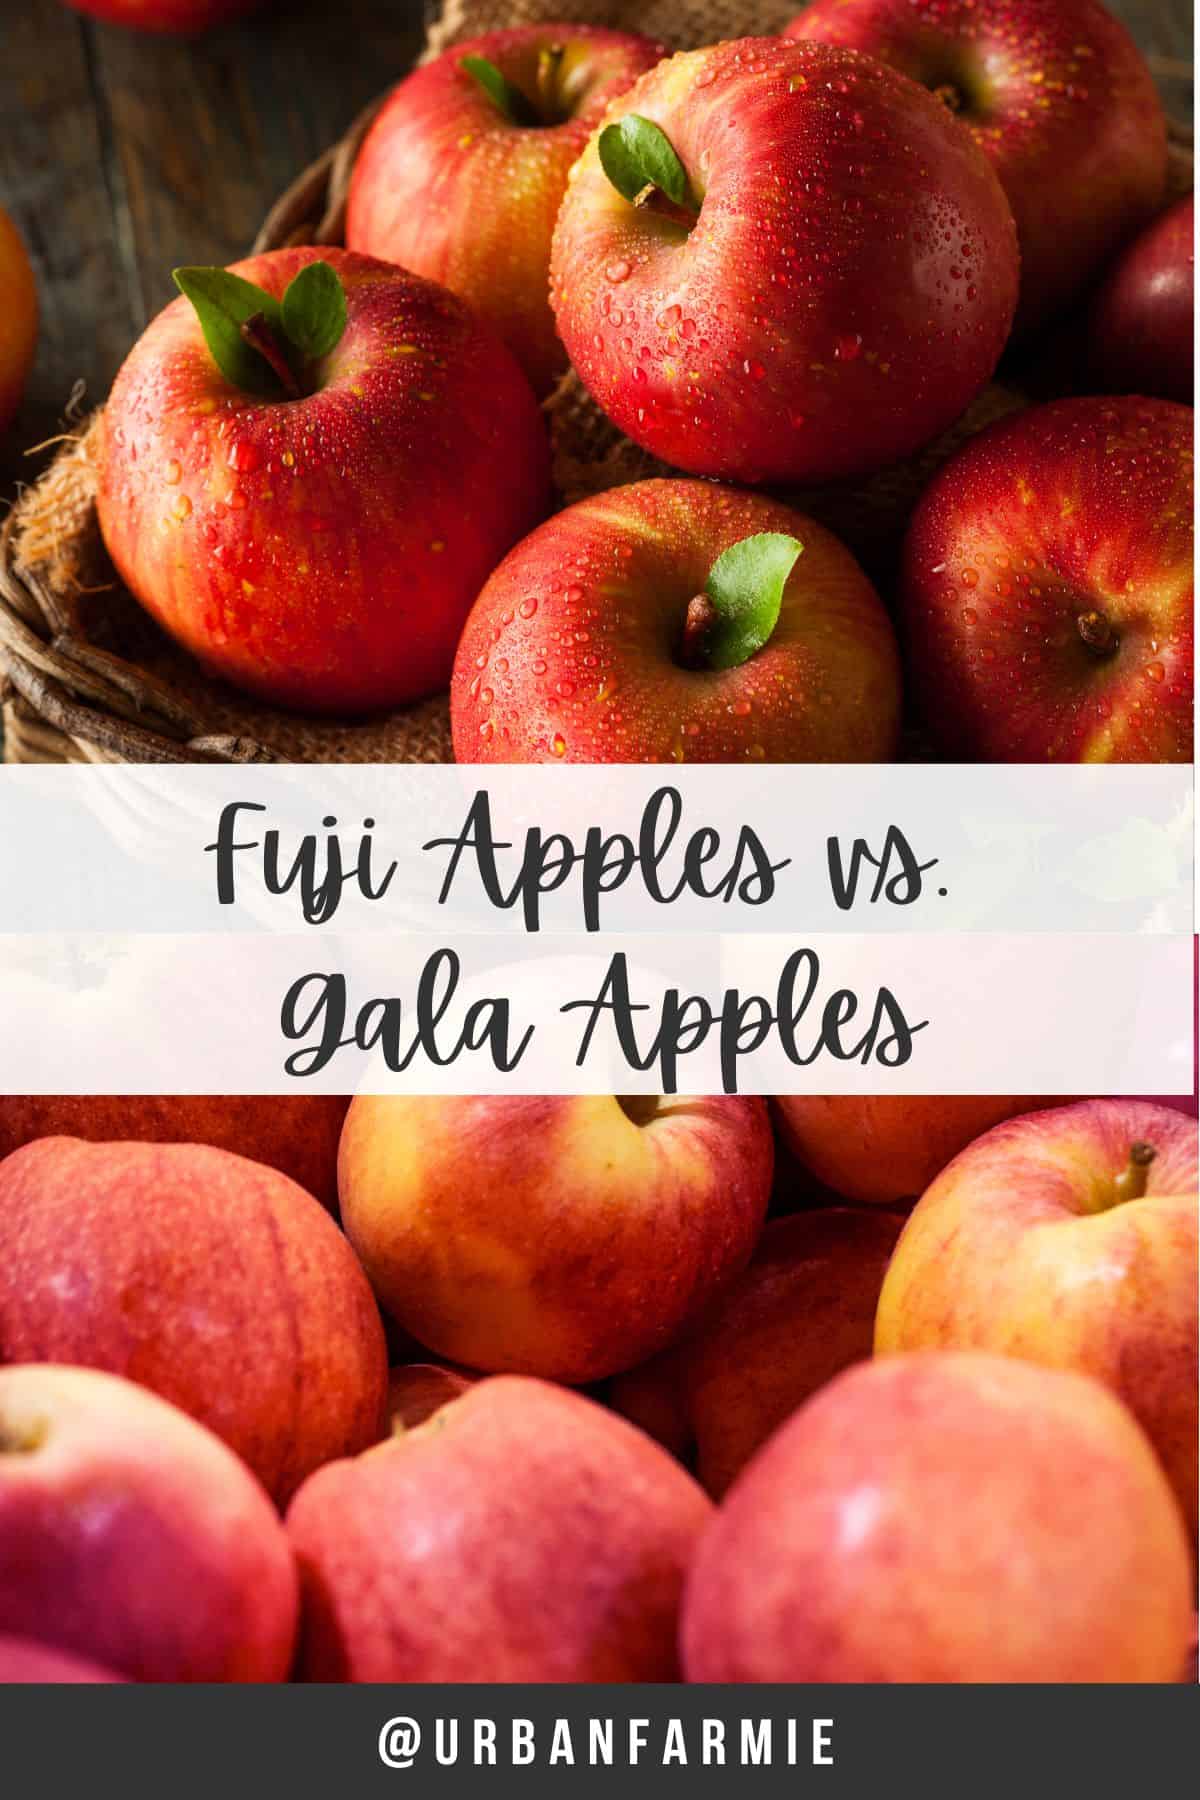 Two panel collage of Fuji apples on top and Gala apples at the bottom, text overlay of title in between.